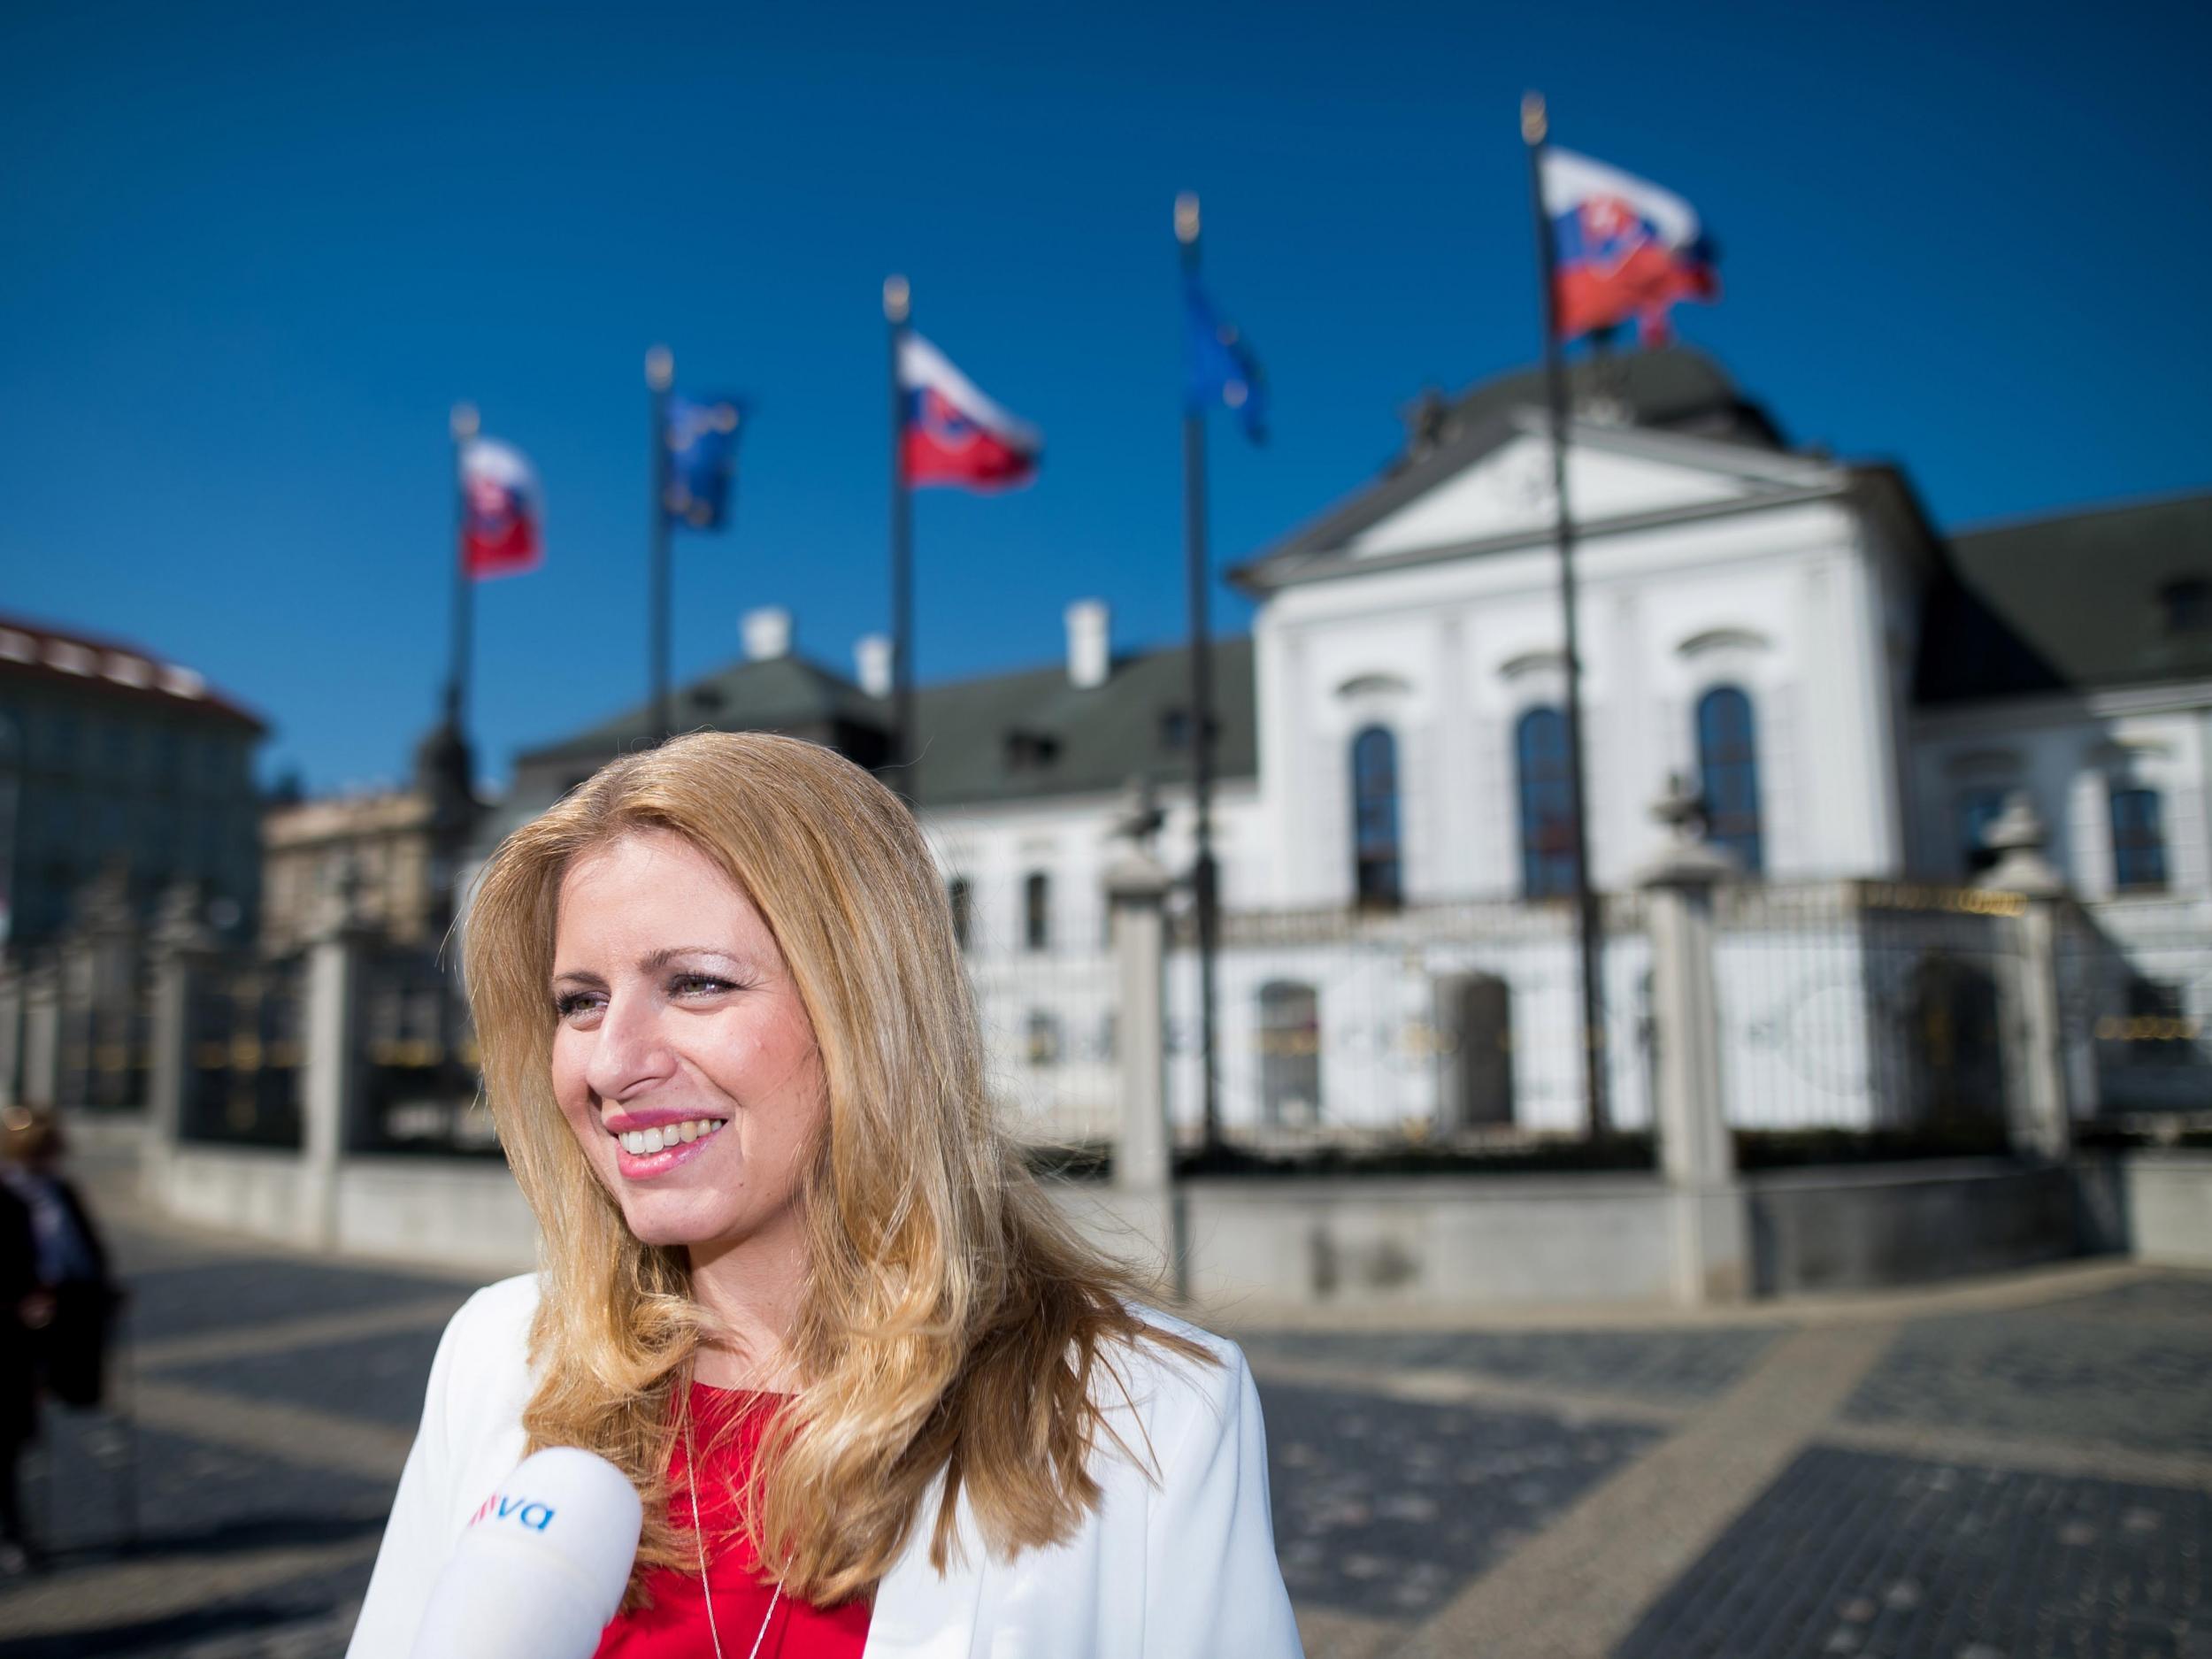 Caputova speaks to journalists in the front of the presidential palace in Bratislava, Slovakia after her presidential victory (Getty/iStock)